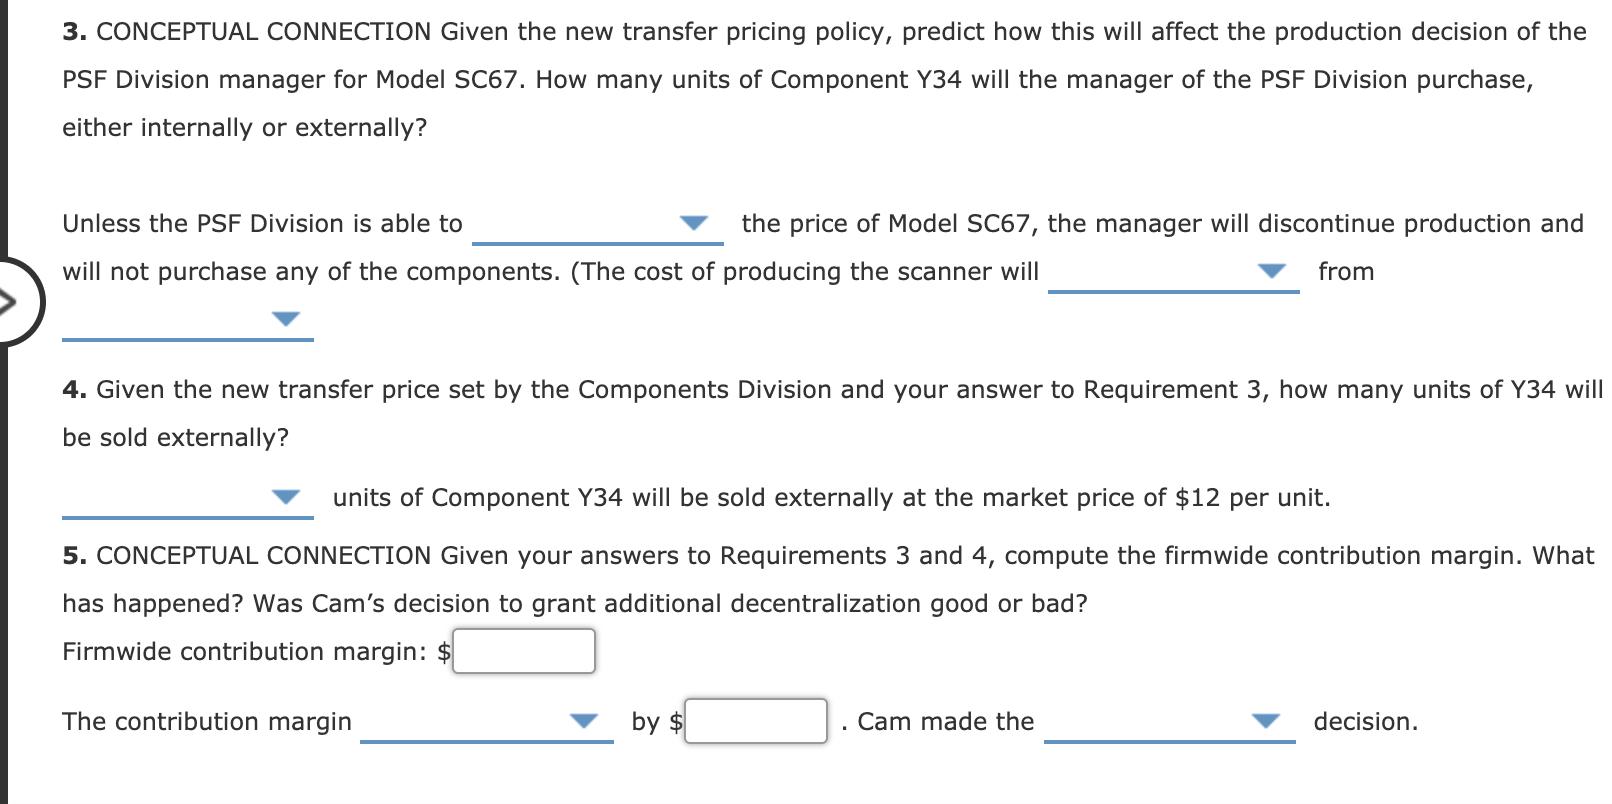 3. CONCEPTUAL CONNECTION Given the new transfer pricing policy, predict how this will affect the production decision of the P